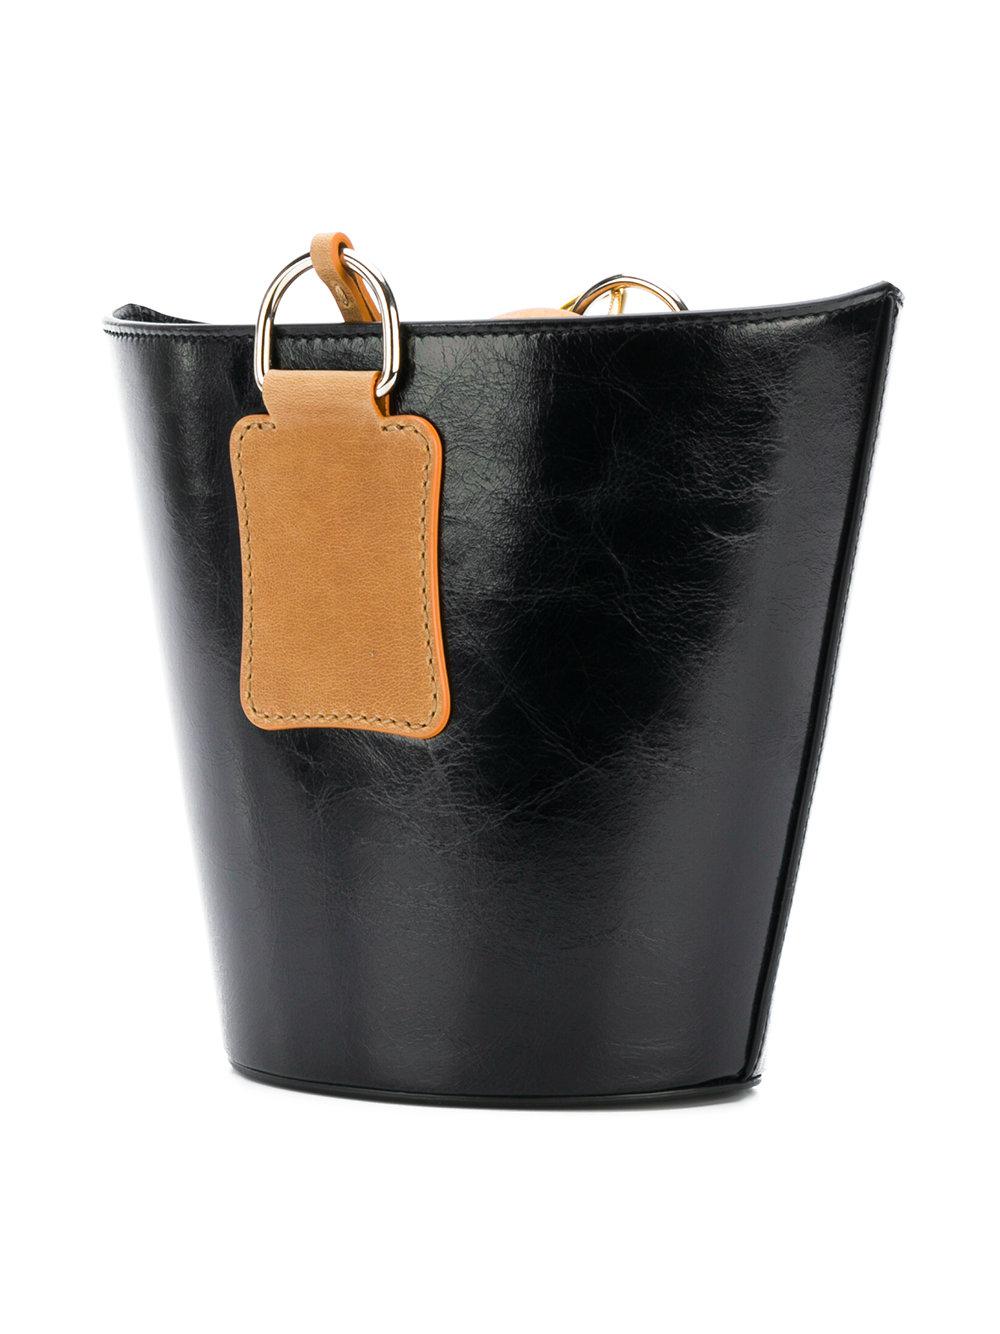 Jacquemus Leather Bucket Bag in Black - Lyst